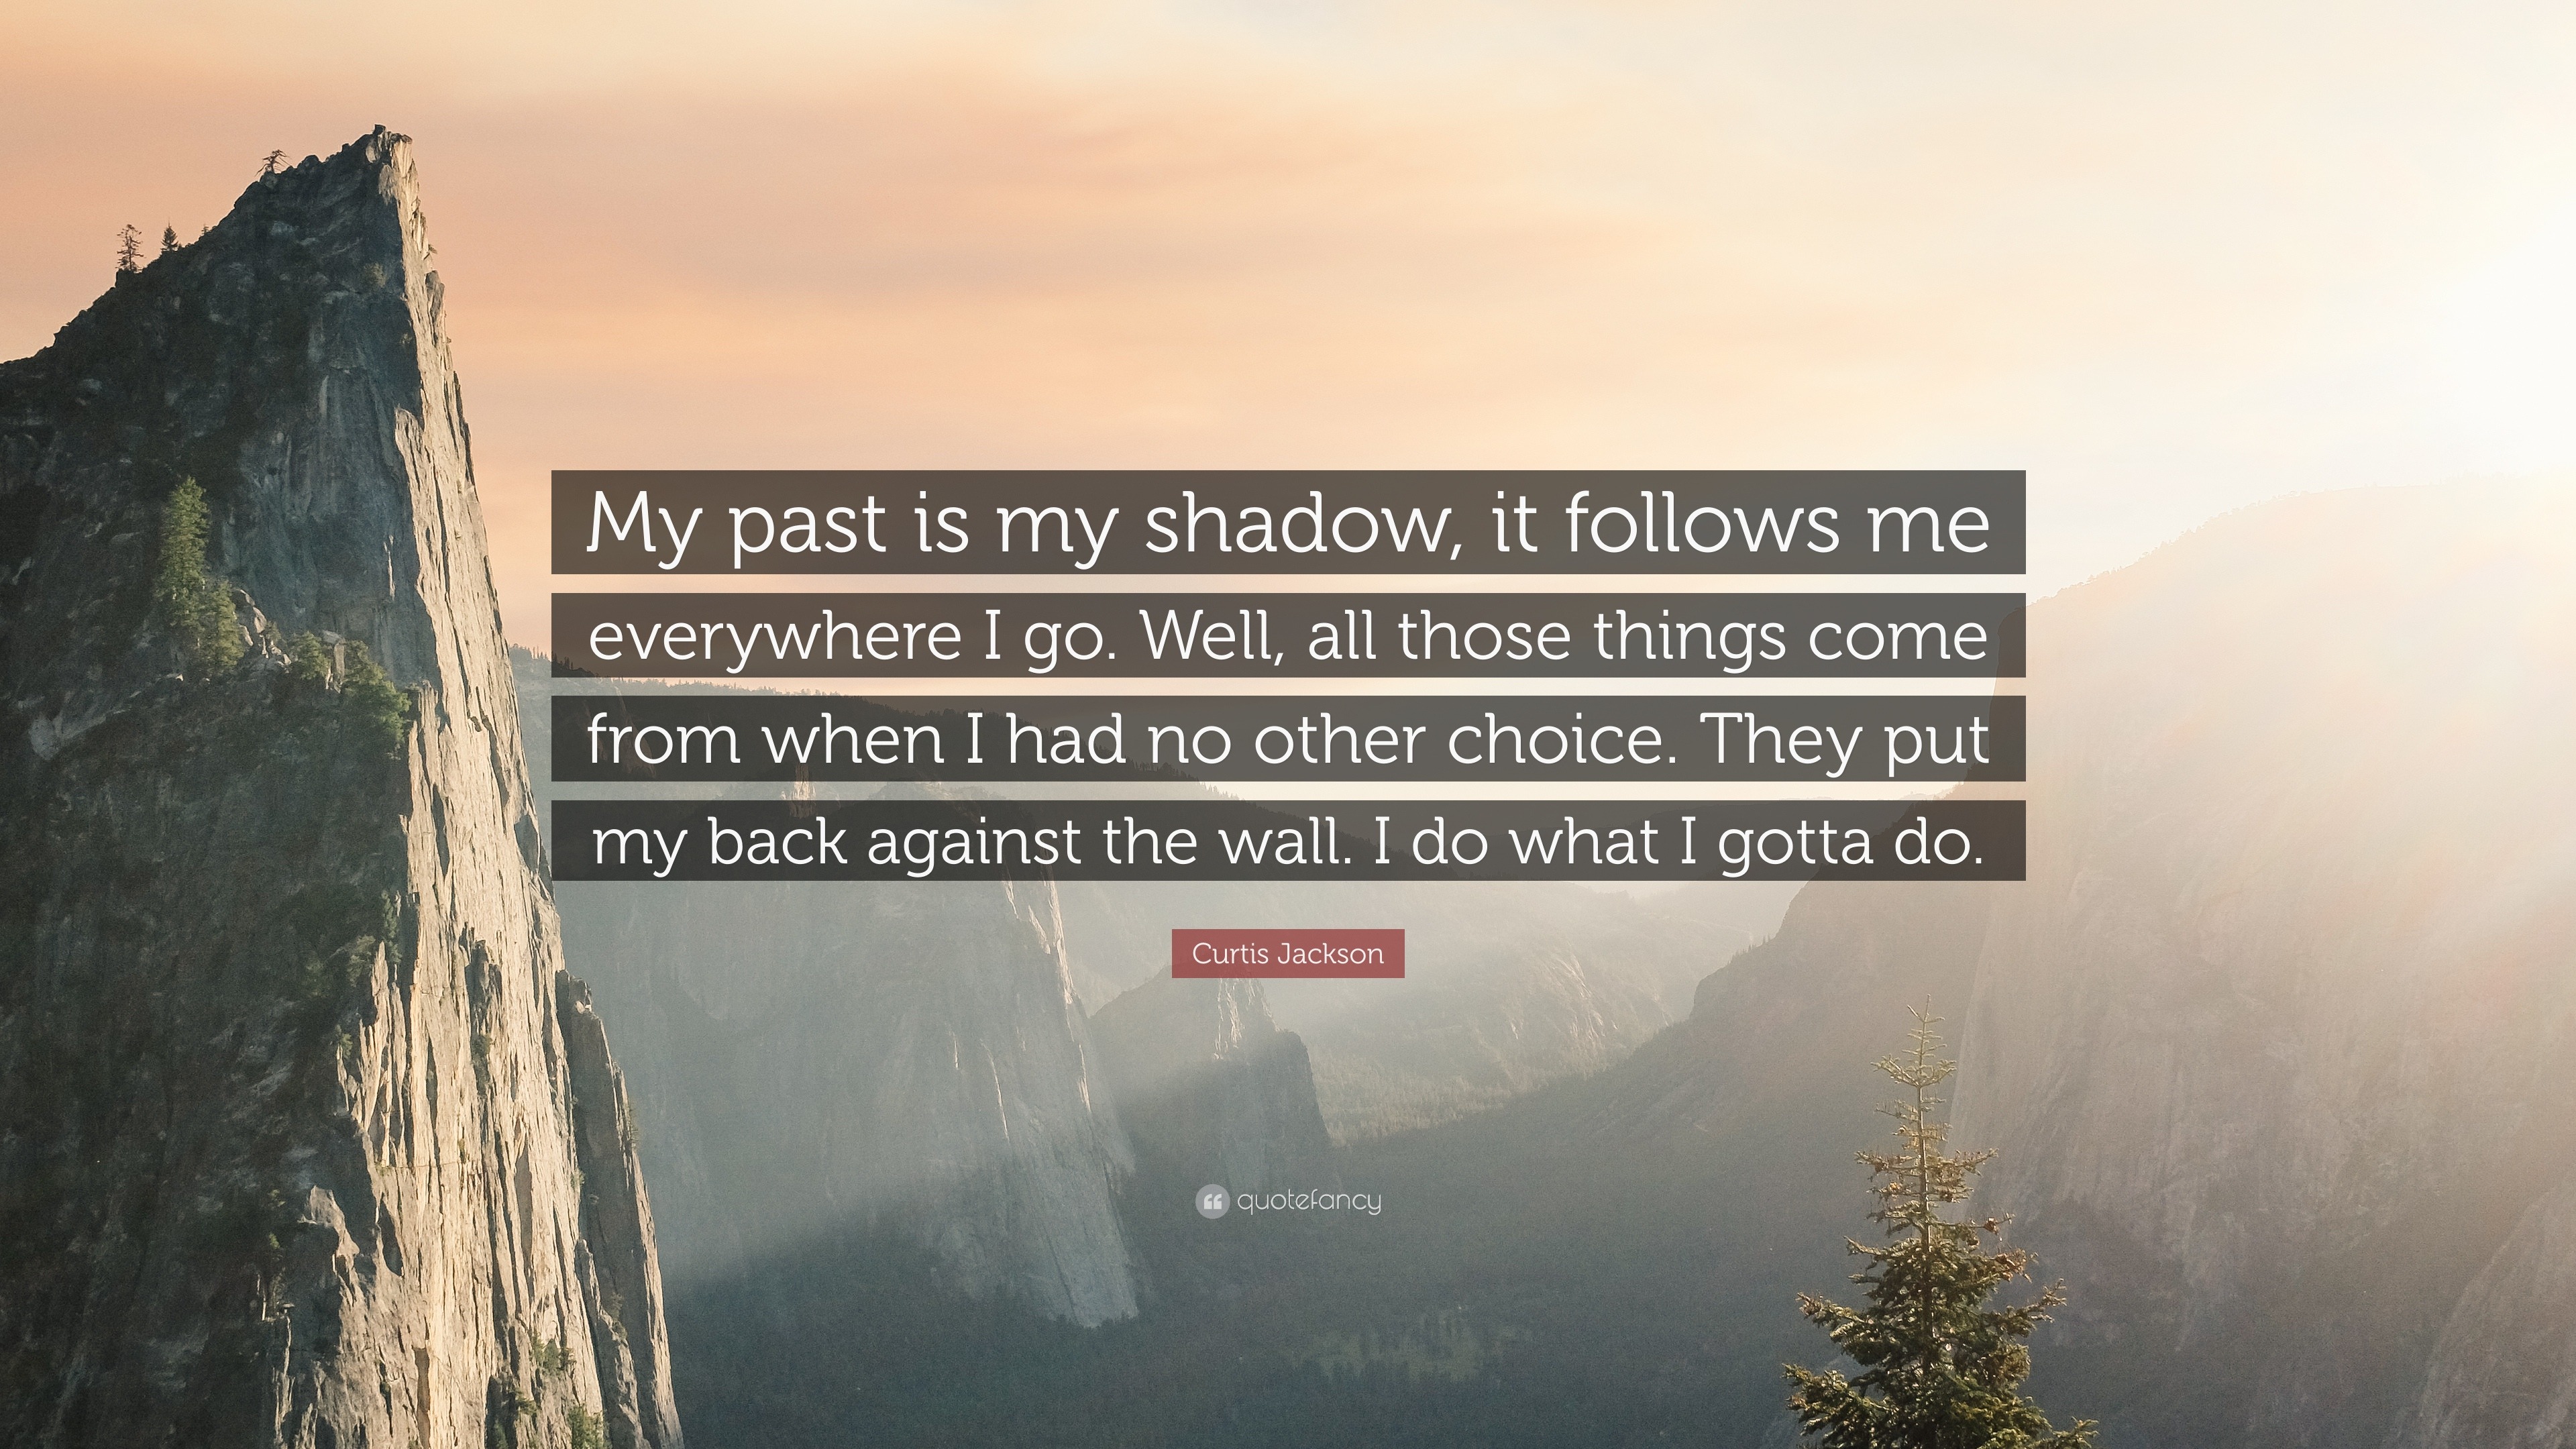 Curtis Jackson Quote My Past Is My Shadow It Follows Me Everywhere I Go Well All Those Things Come From When I Had No Other Choice They P